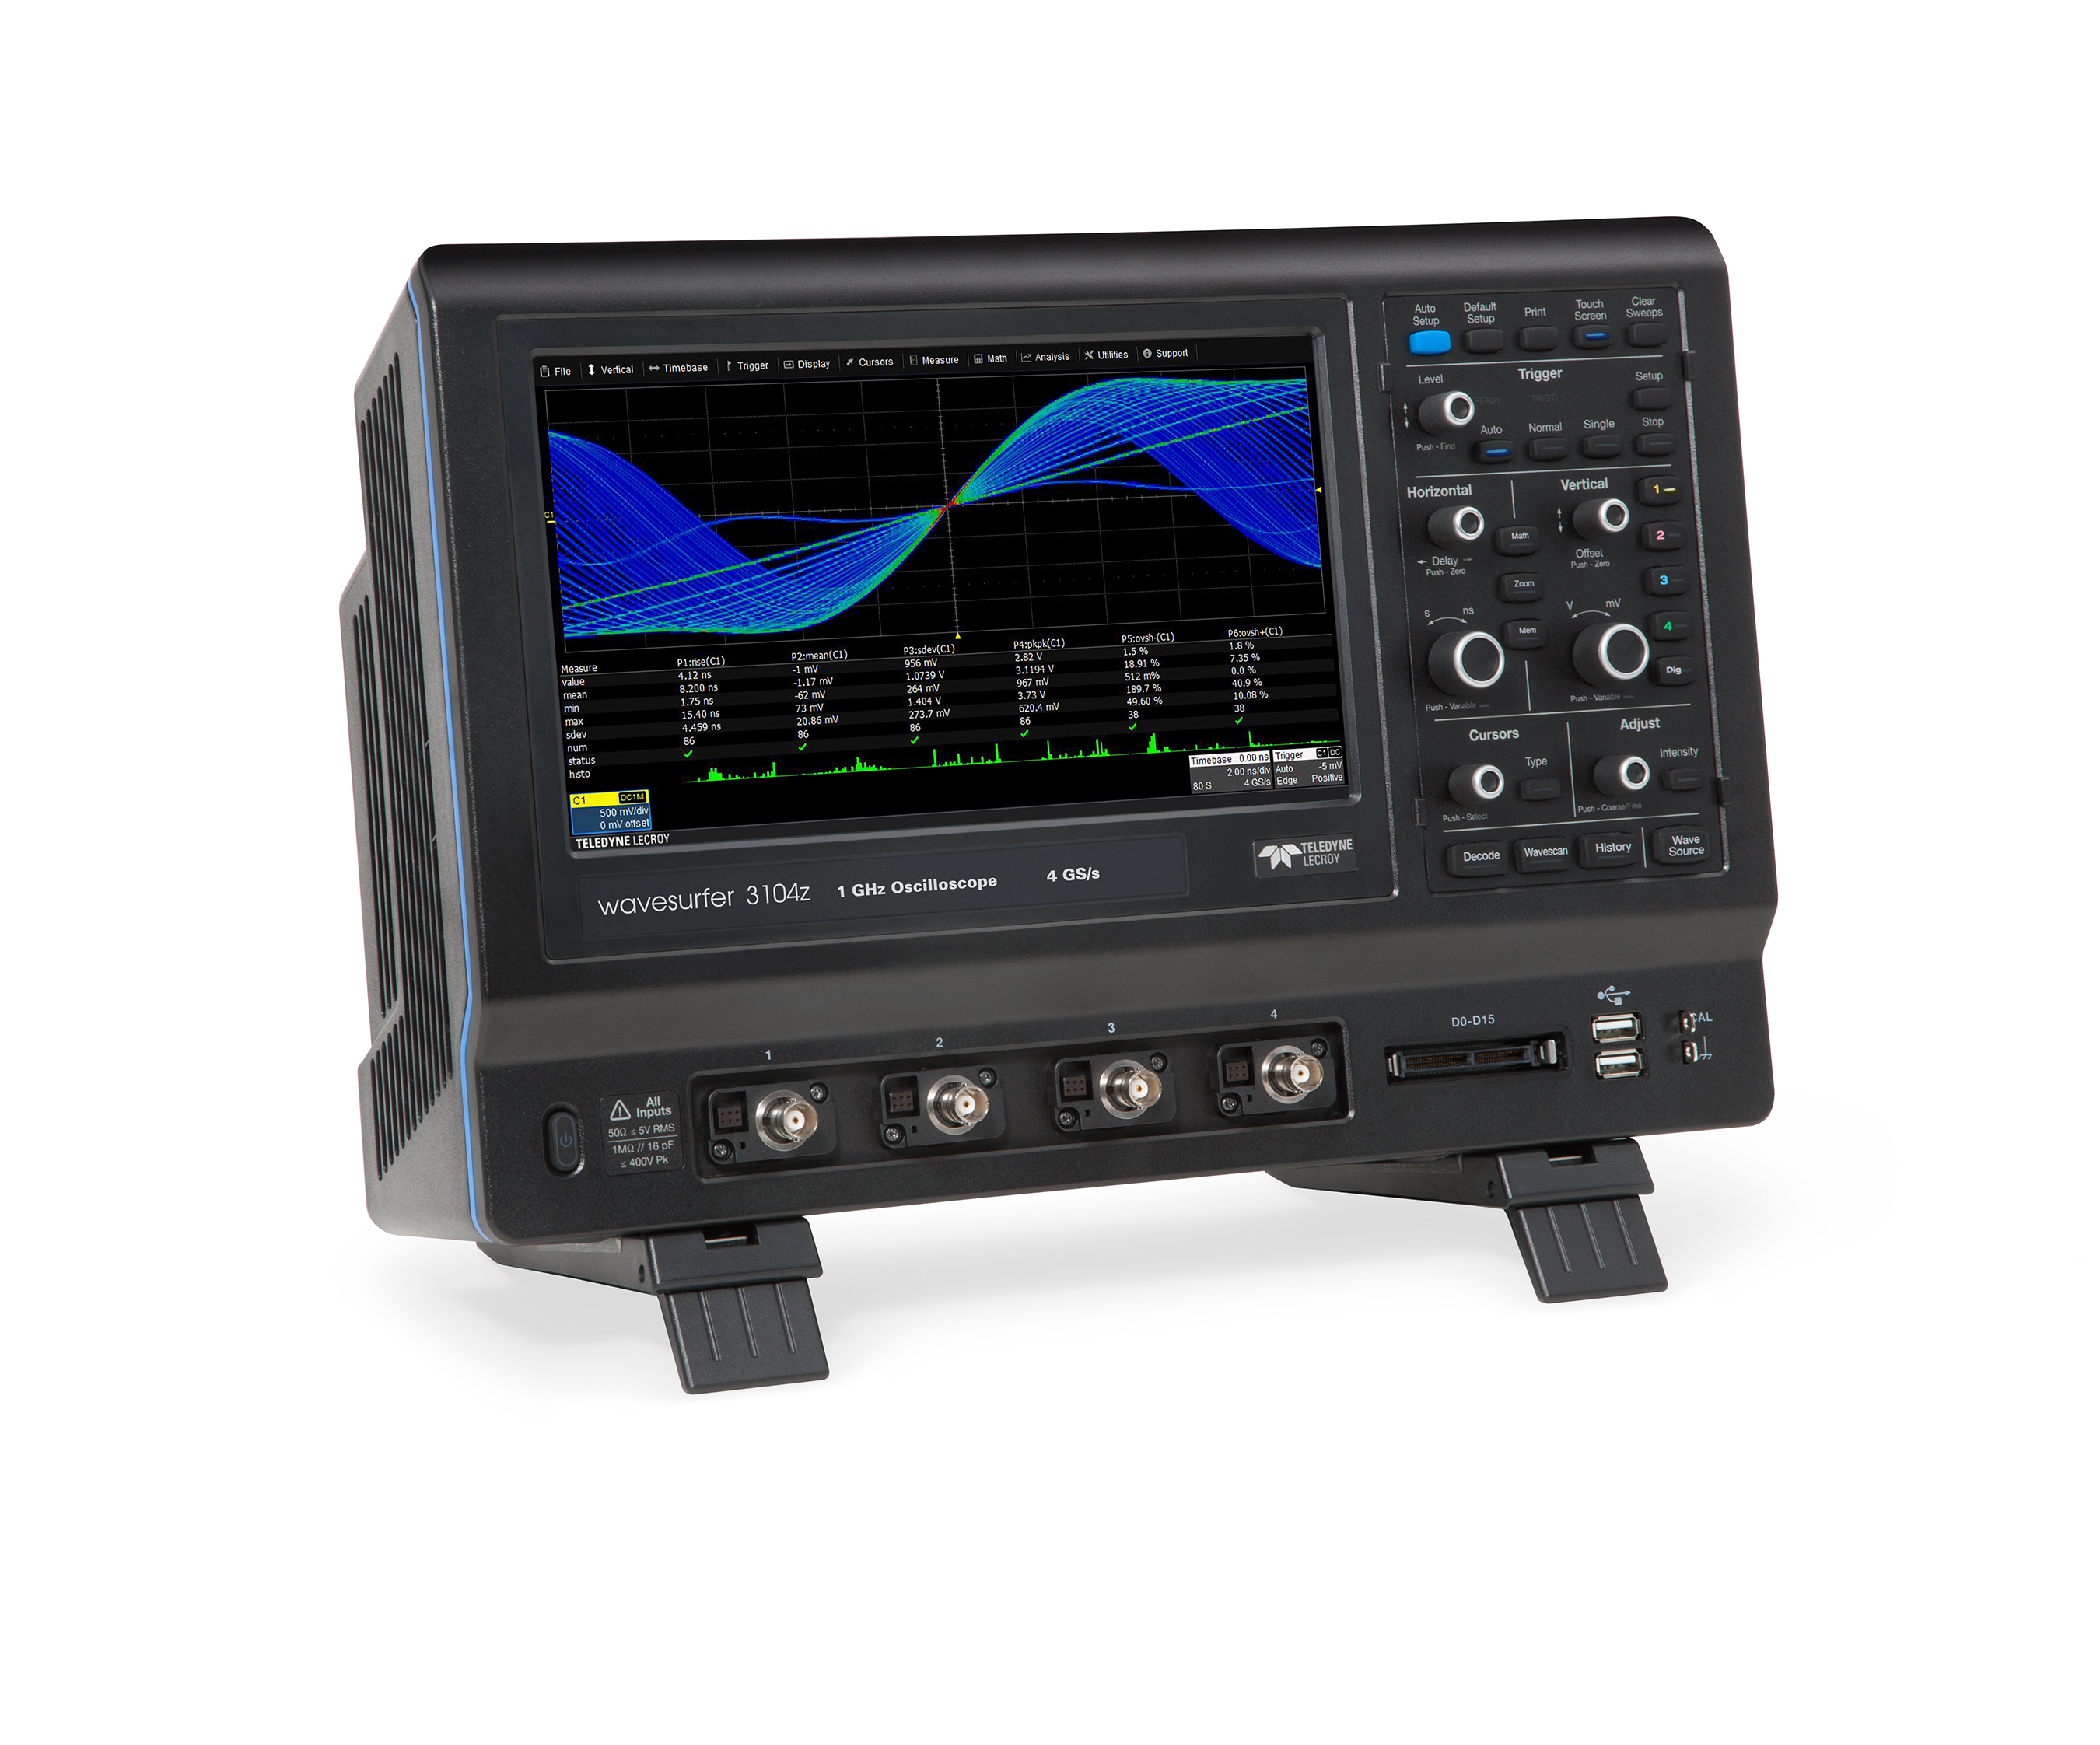 3000z Oscilloscopes Expand Bandwidth Range Above and Below That of Earlier Models